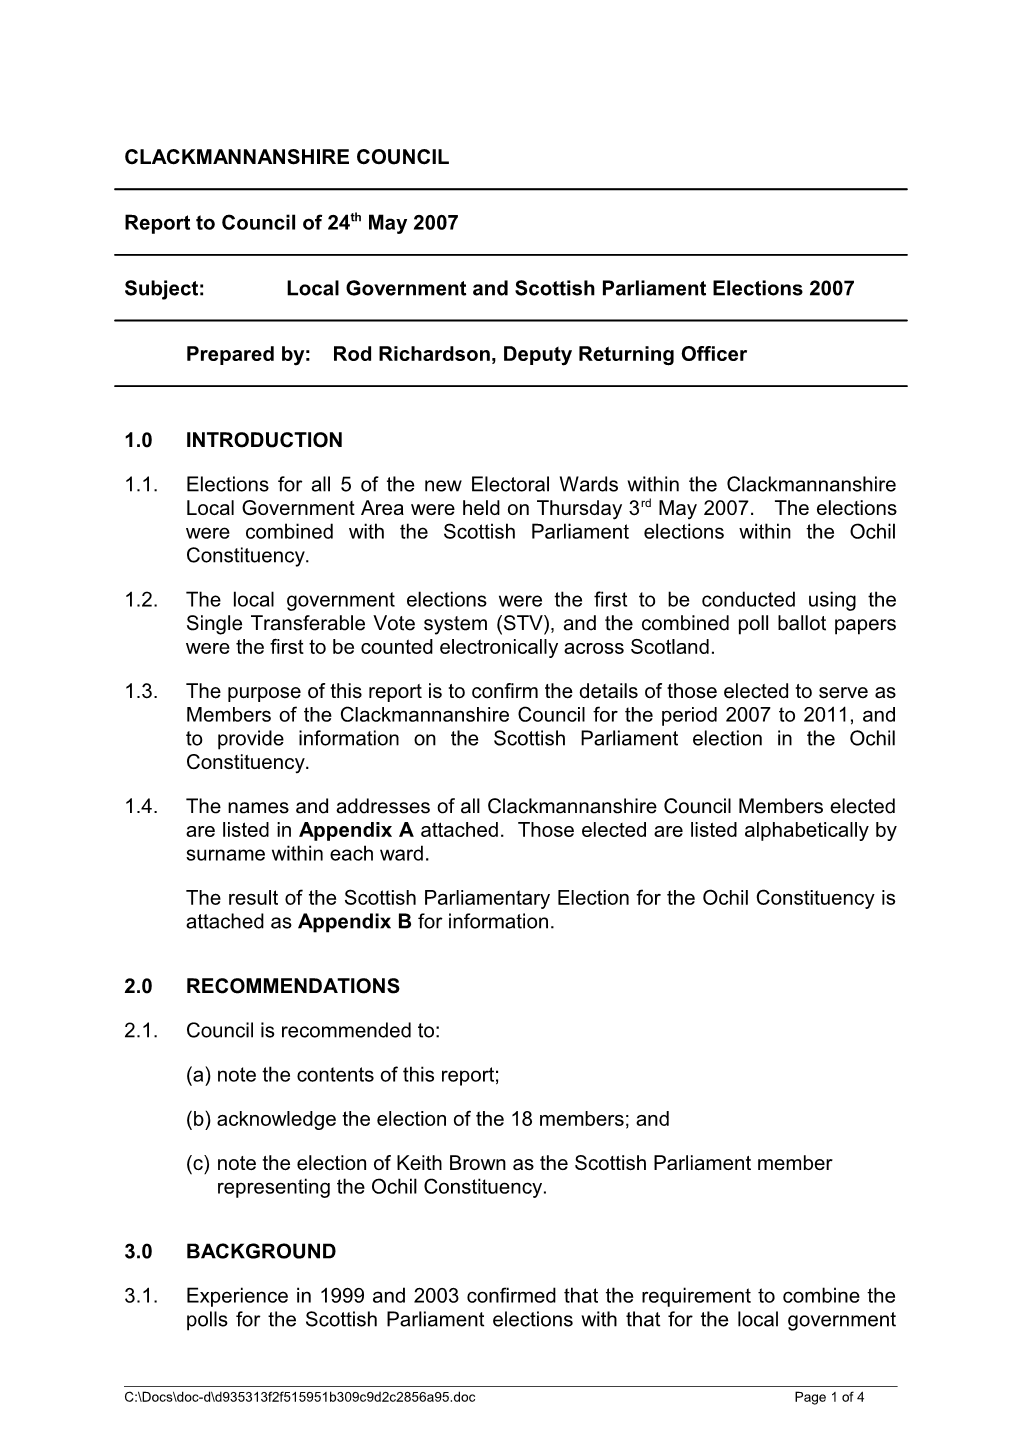 Subject: Local Government and Scottish Parliament Elections 2007